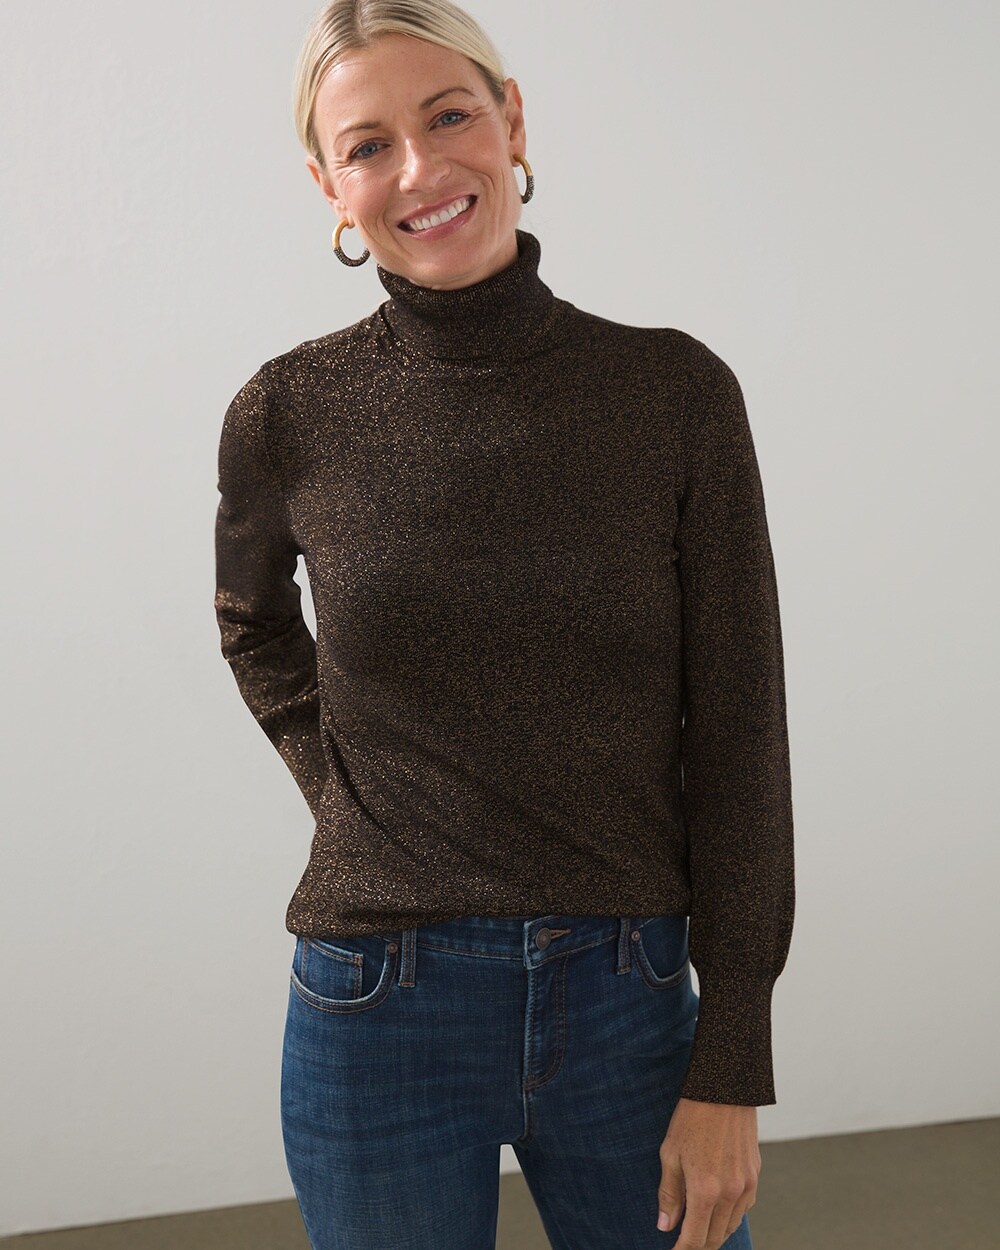 Ecovero Lurex Twist Turtleneck Sweater video preview image, click to start video